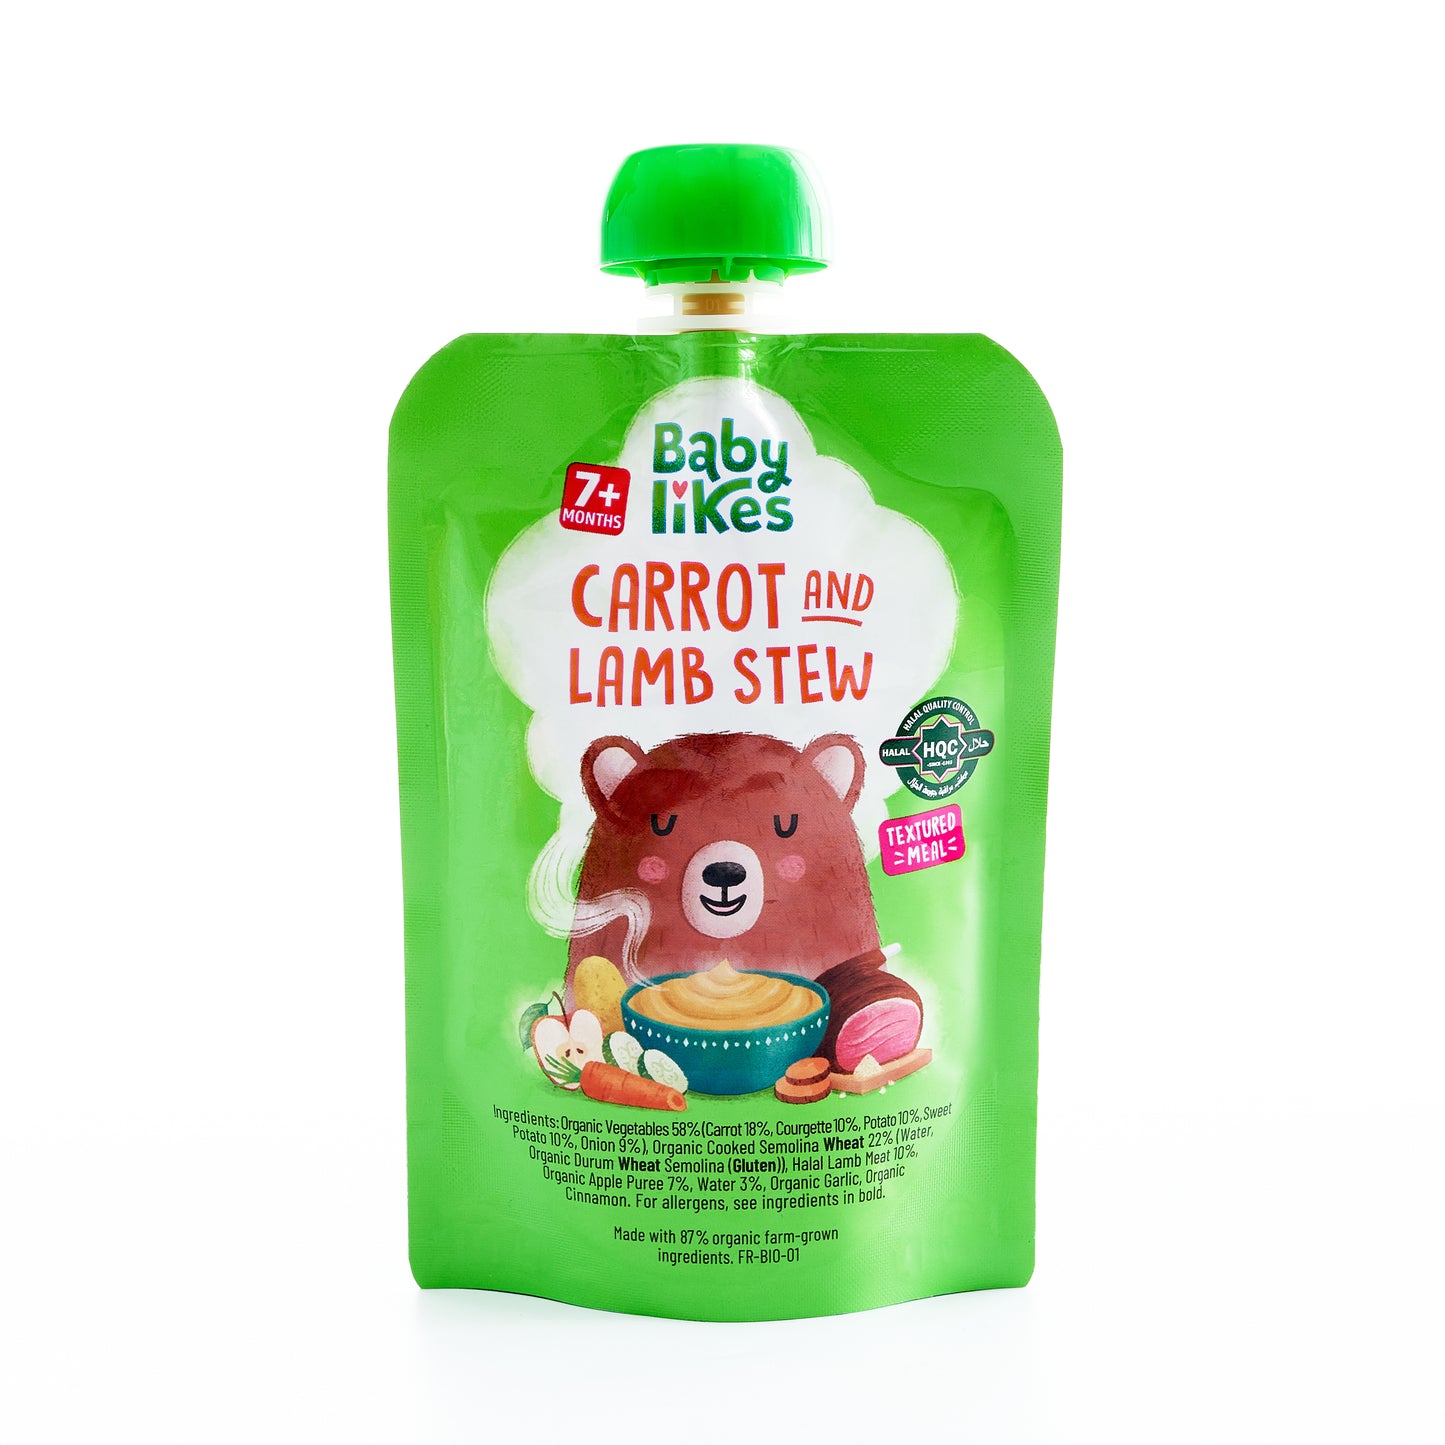 Halal Baby Food Pouches - Carrot and Lamb Stew 6 pouches, 130g, Stage 2, Organic Baby Puree for 7+ months